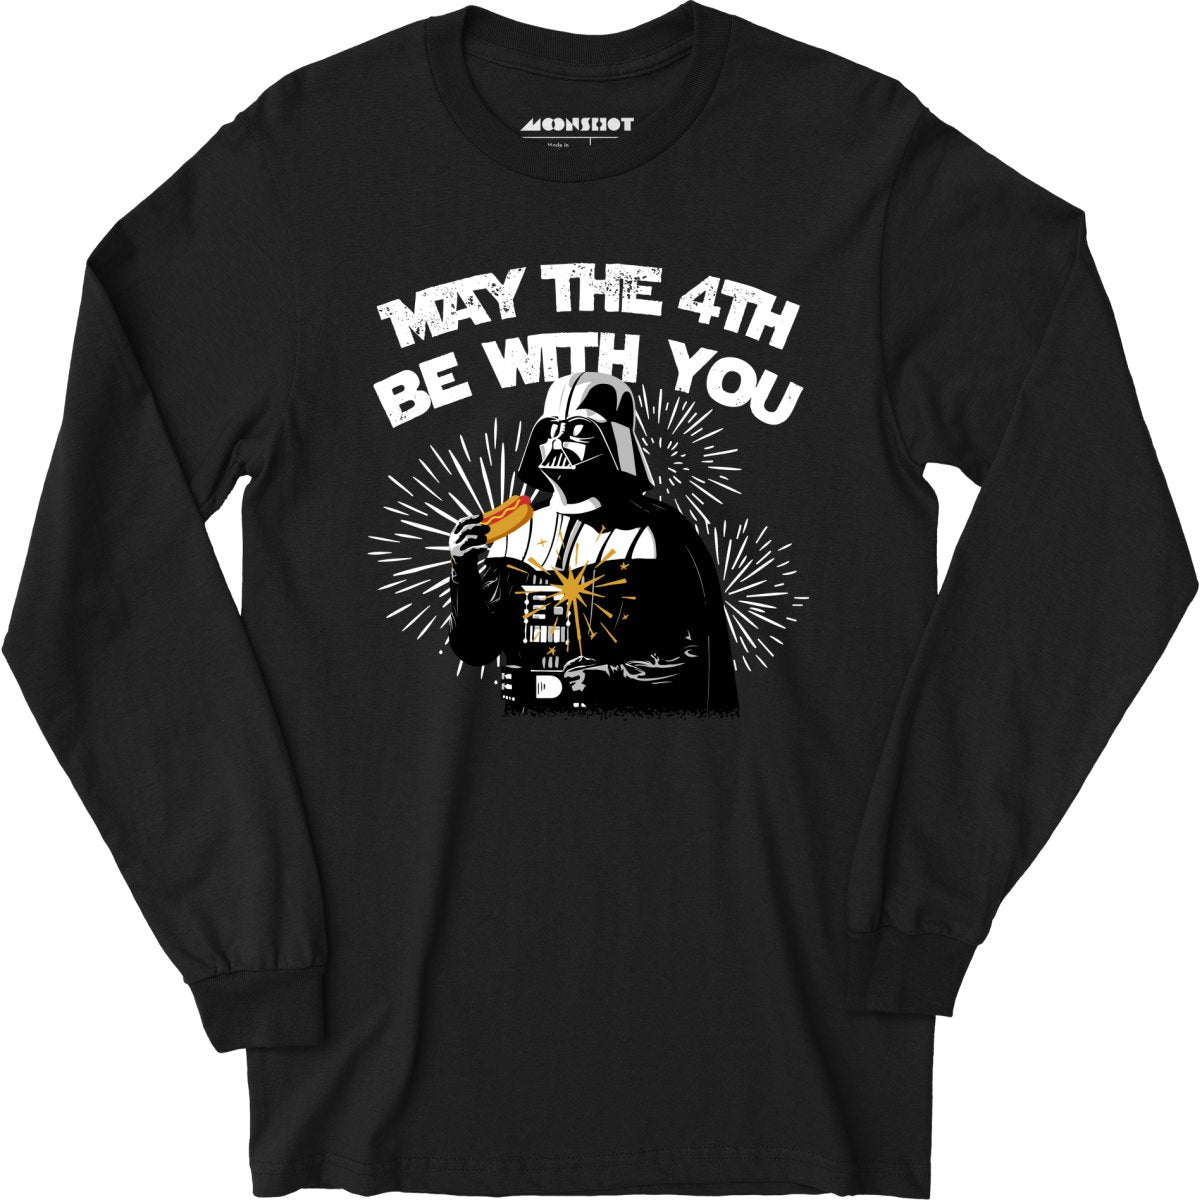 May The 4th Be With You - Long Sleeve T-Shirt